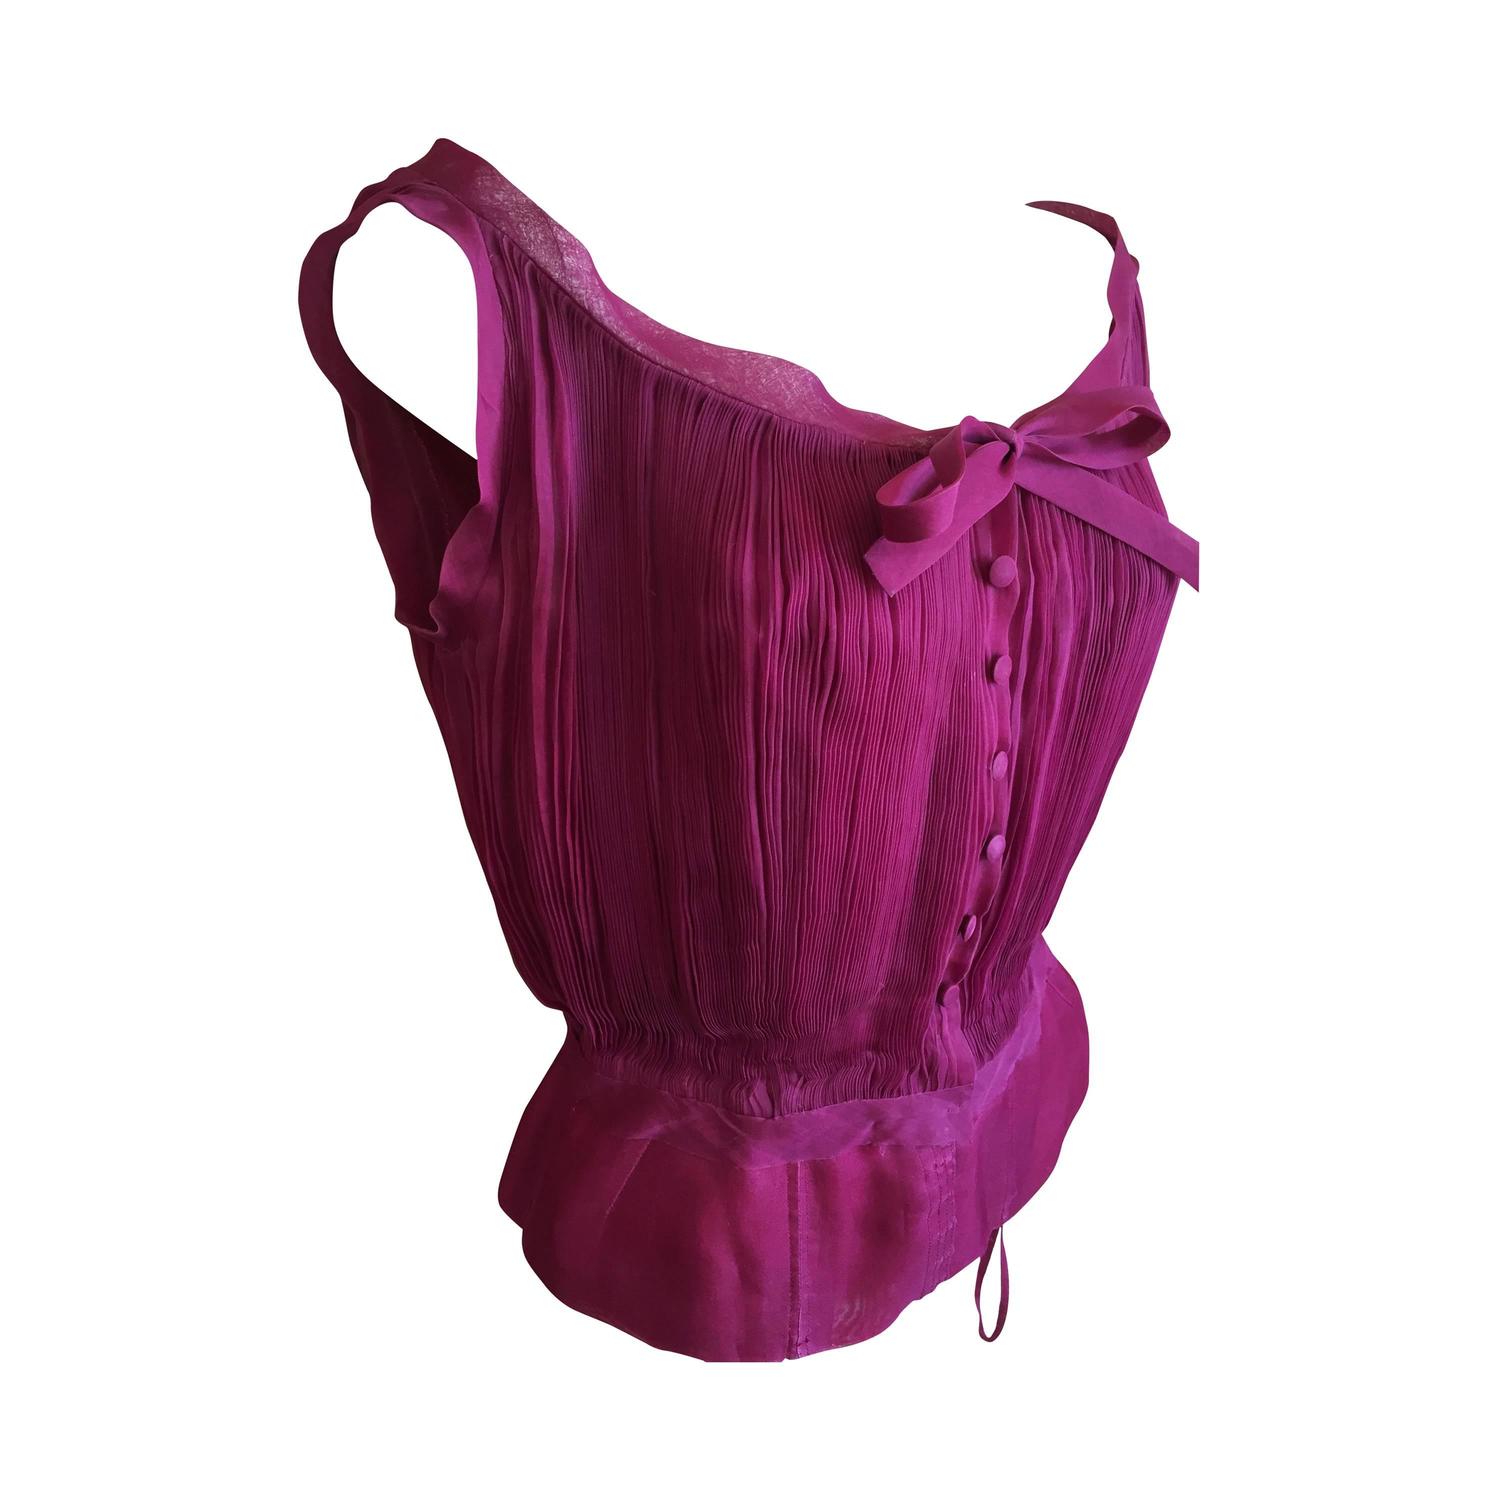 Christian Dior A' 1954 Haute Couture Pleated Purple Top at 1stdibs